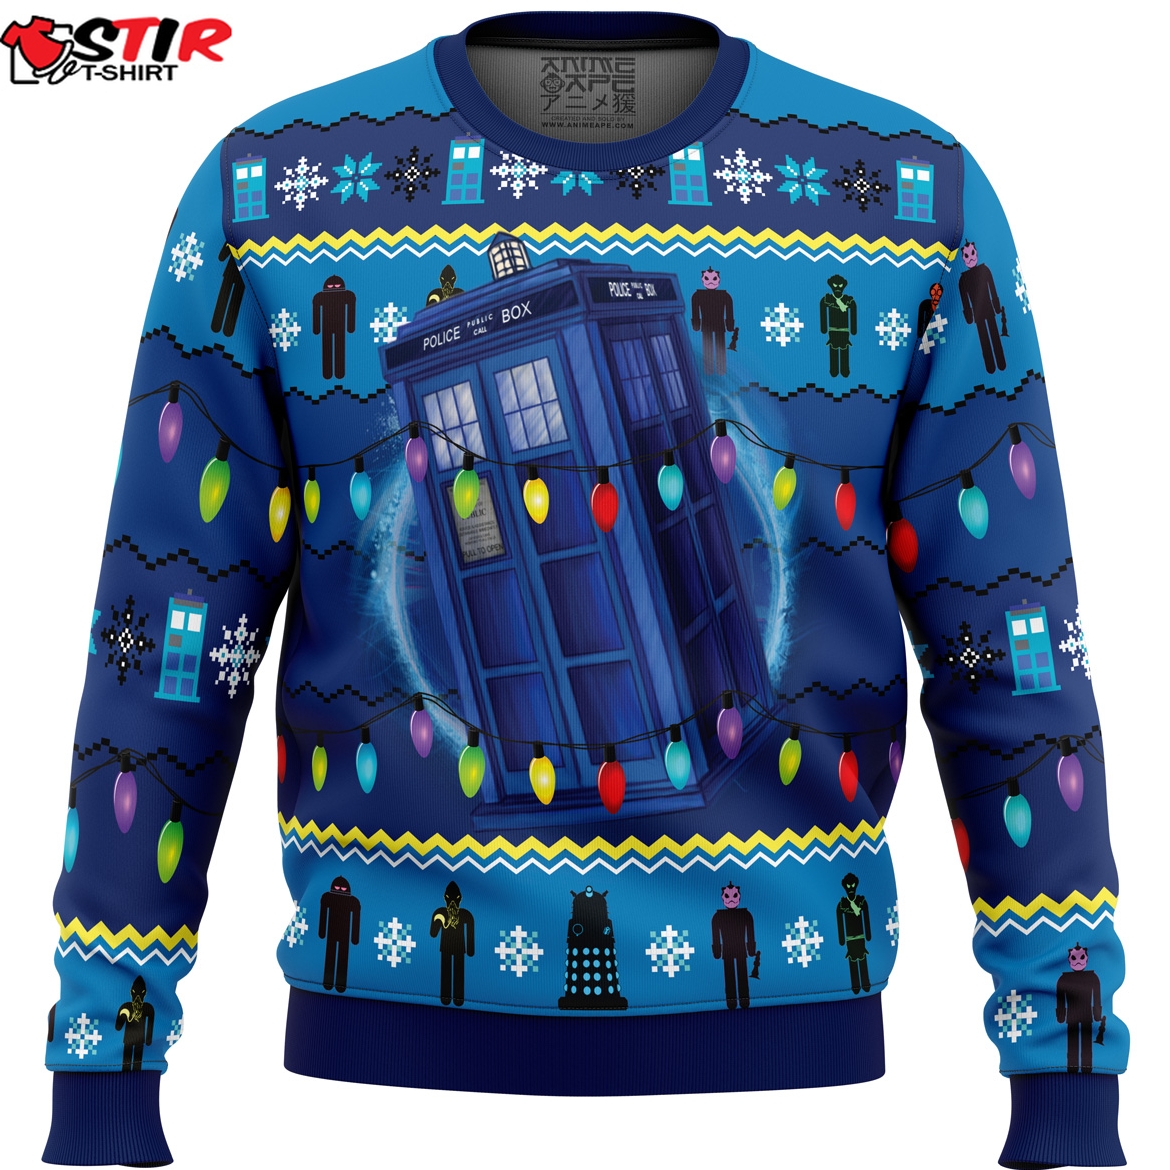 WhoS Outside Doctor Who Ugly Christmas Sweater Stirtshirt